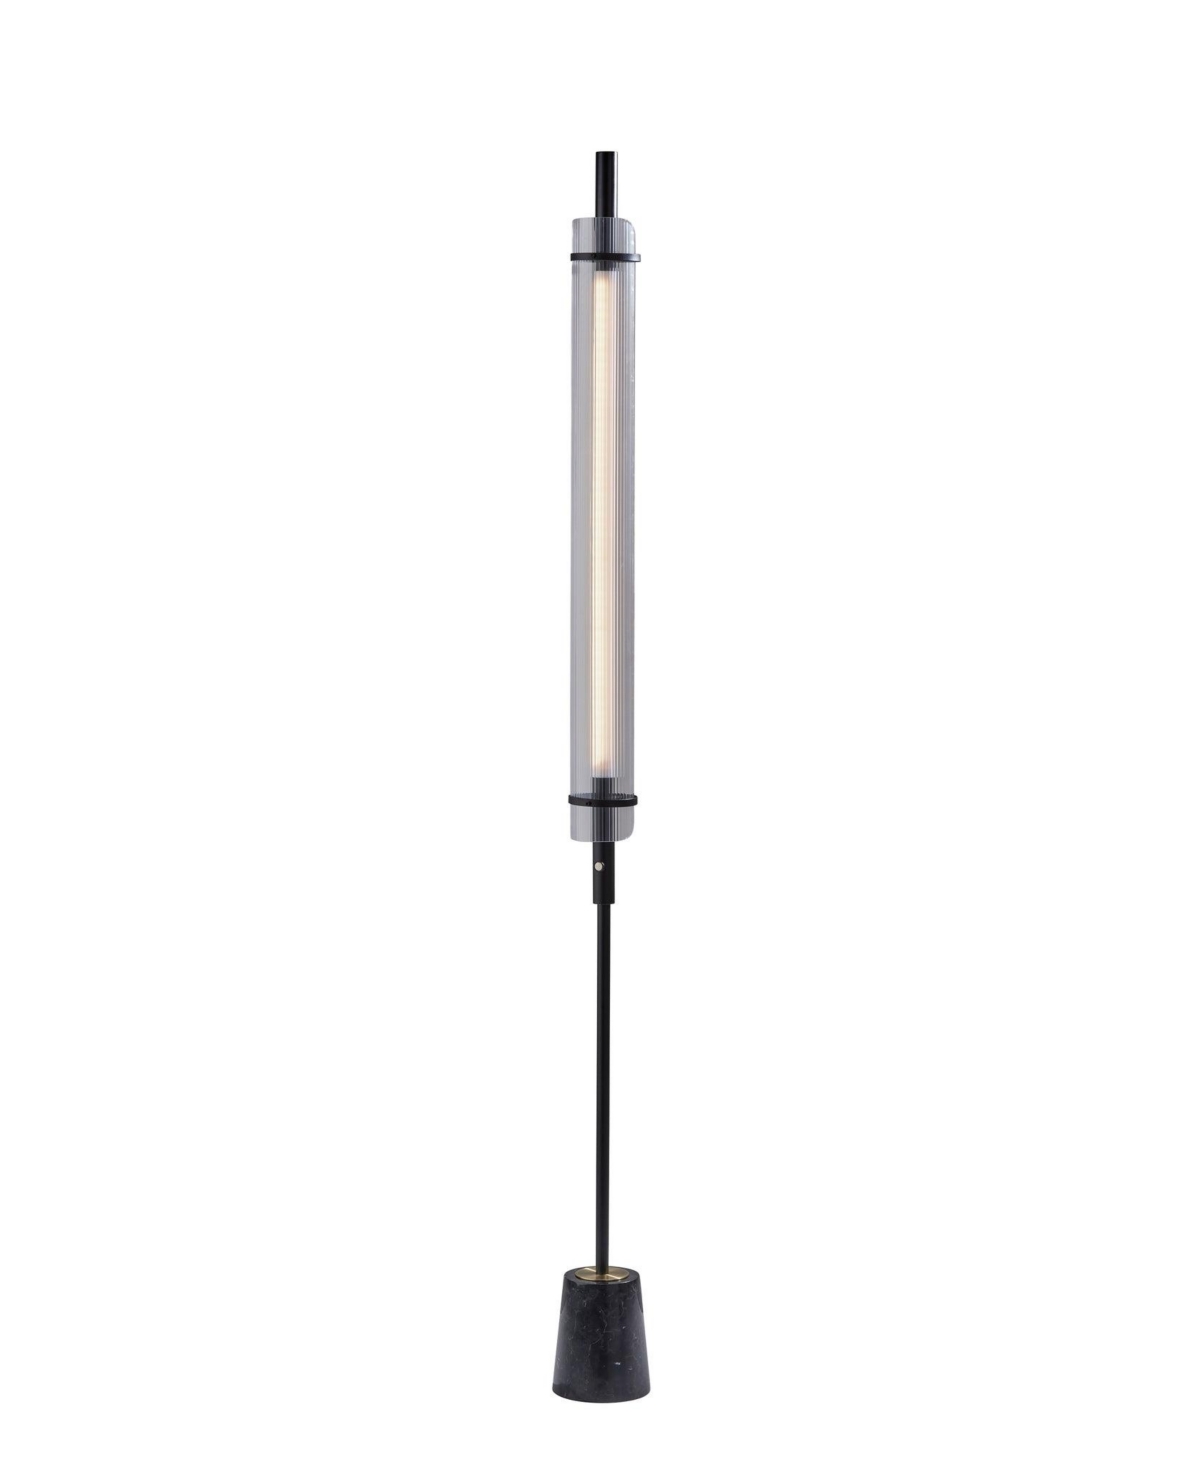 Adesso Flair Led Floor Lamp In Black With Antique-like Brass Accents